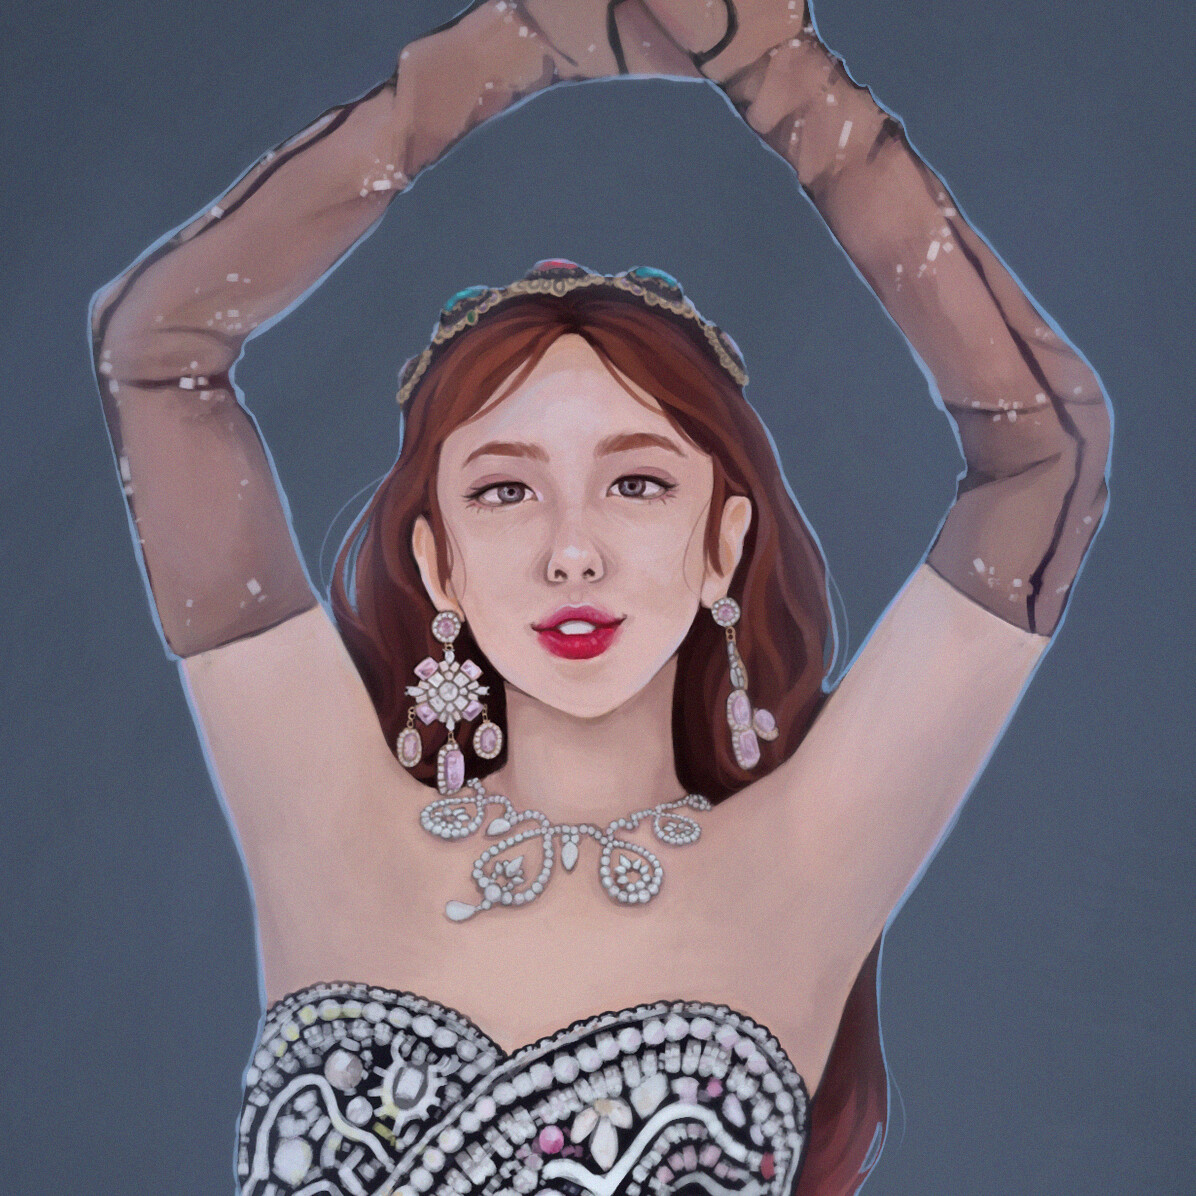 ArtStation - Outfit of NAYEON (#TWICE) in #POP